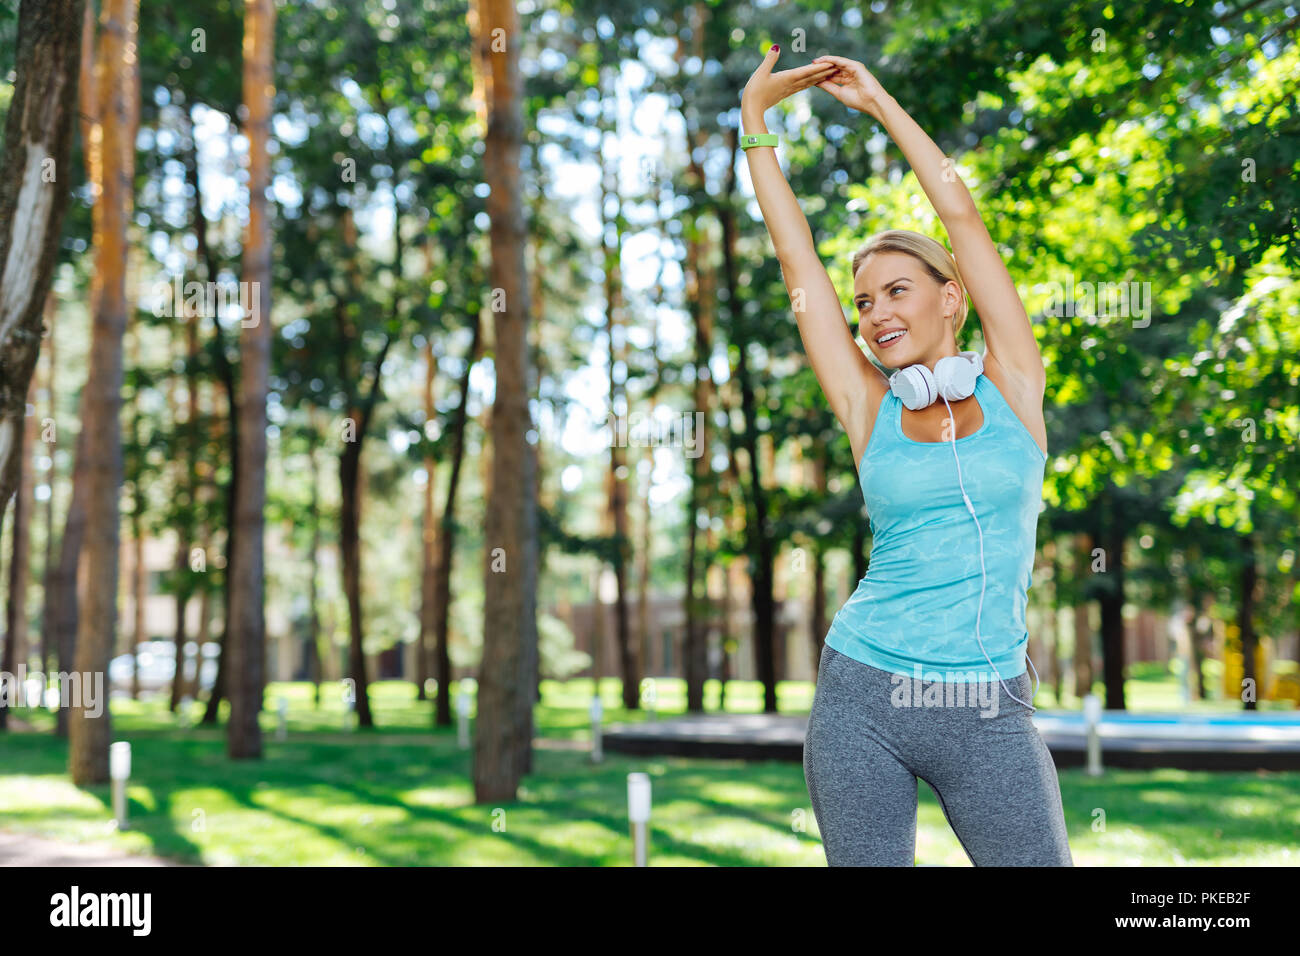 Joyful young woman exercising alone in the park Stock Photo